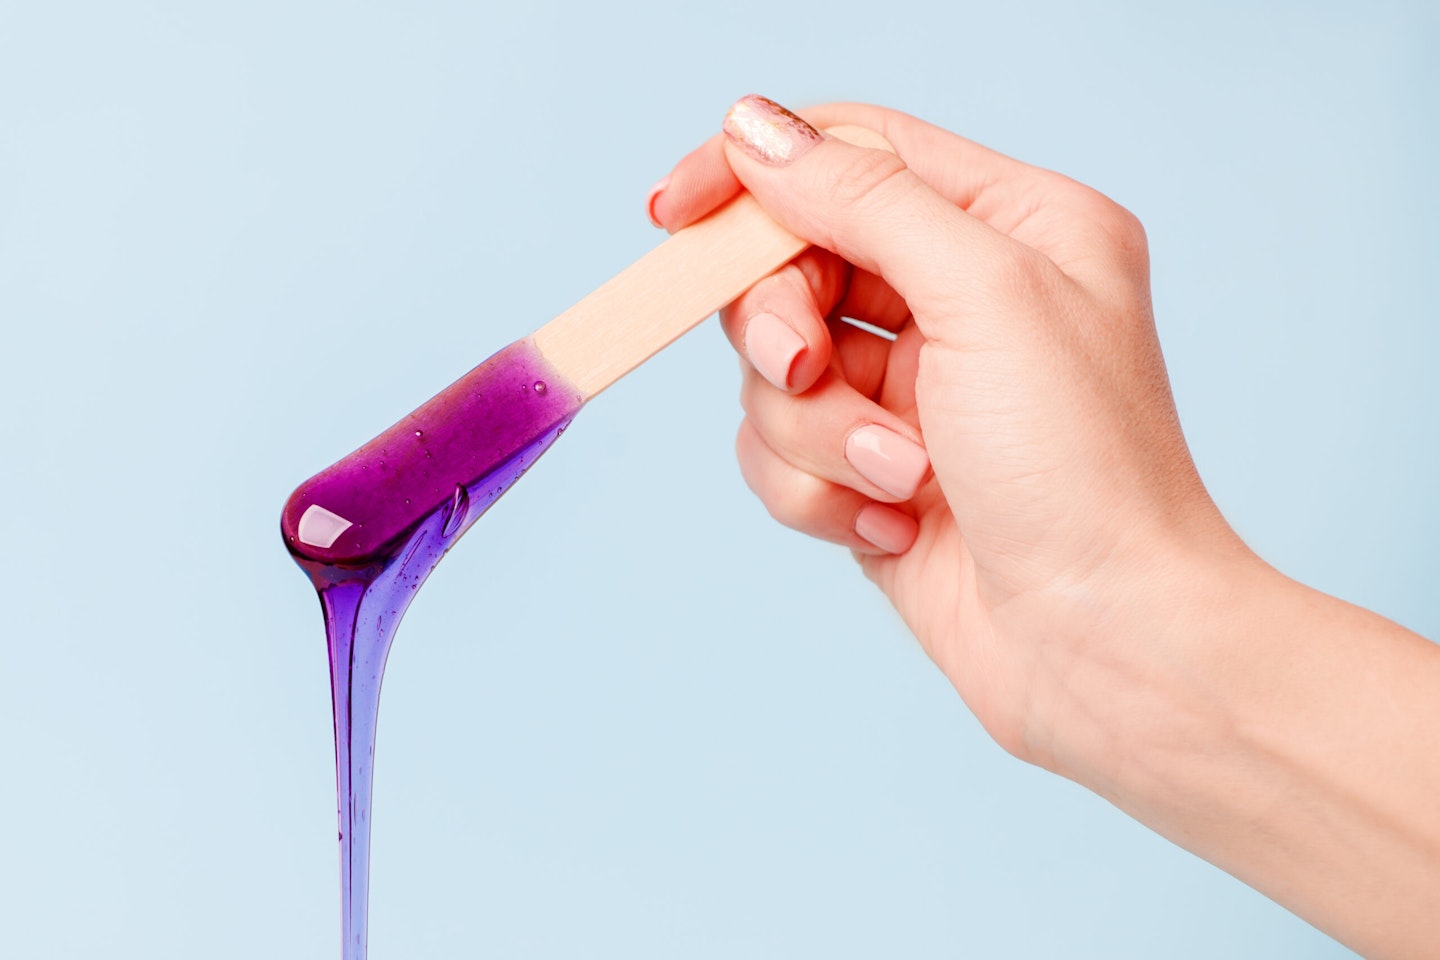 How to Wax at Home Safely, According to Experts